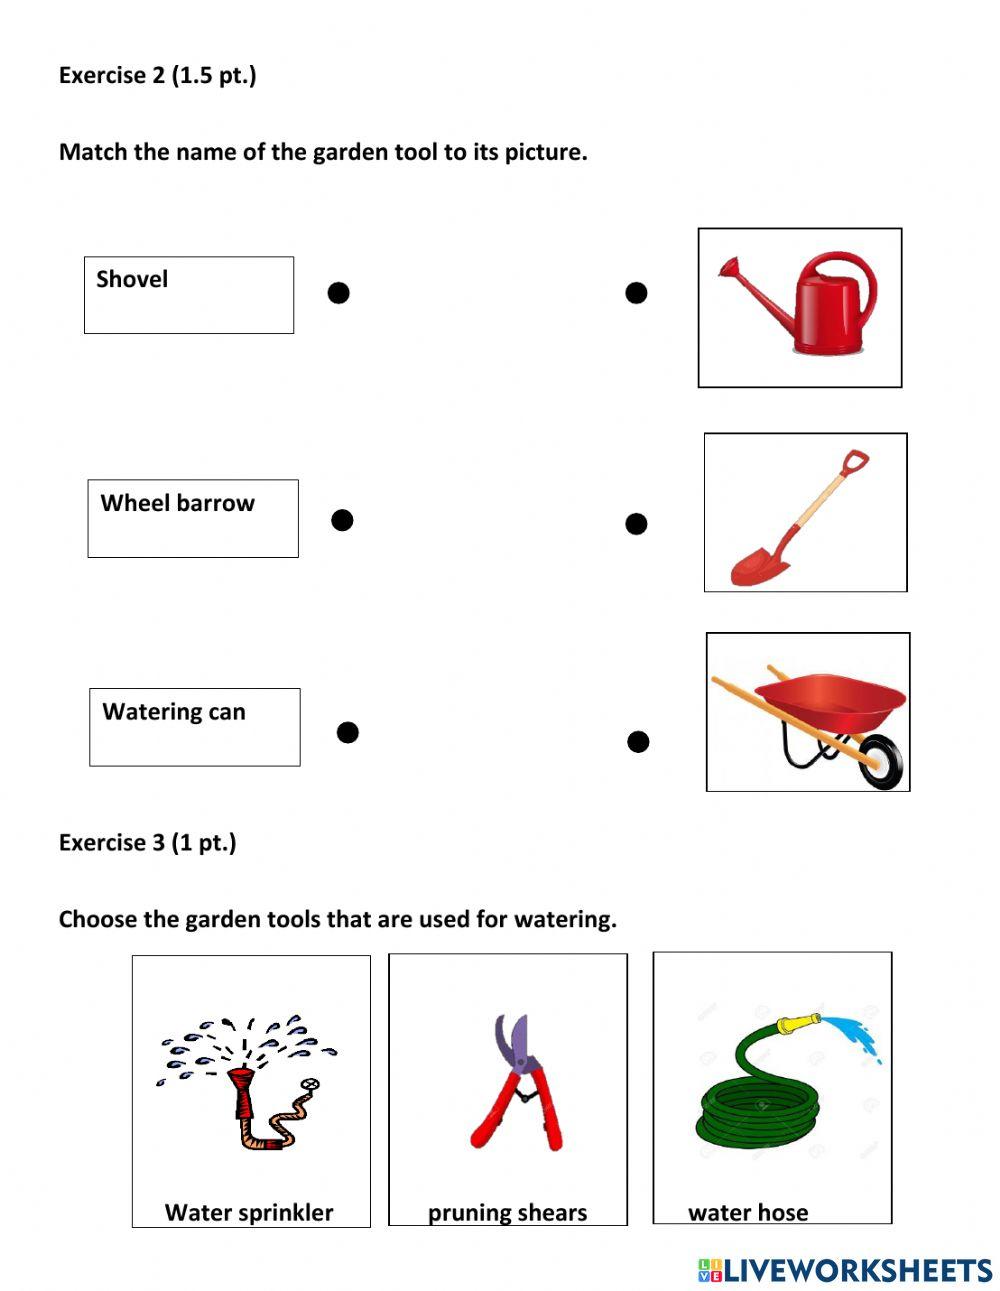 G2 T2 Quiz 3 Taking care of gardens